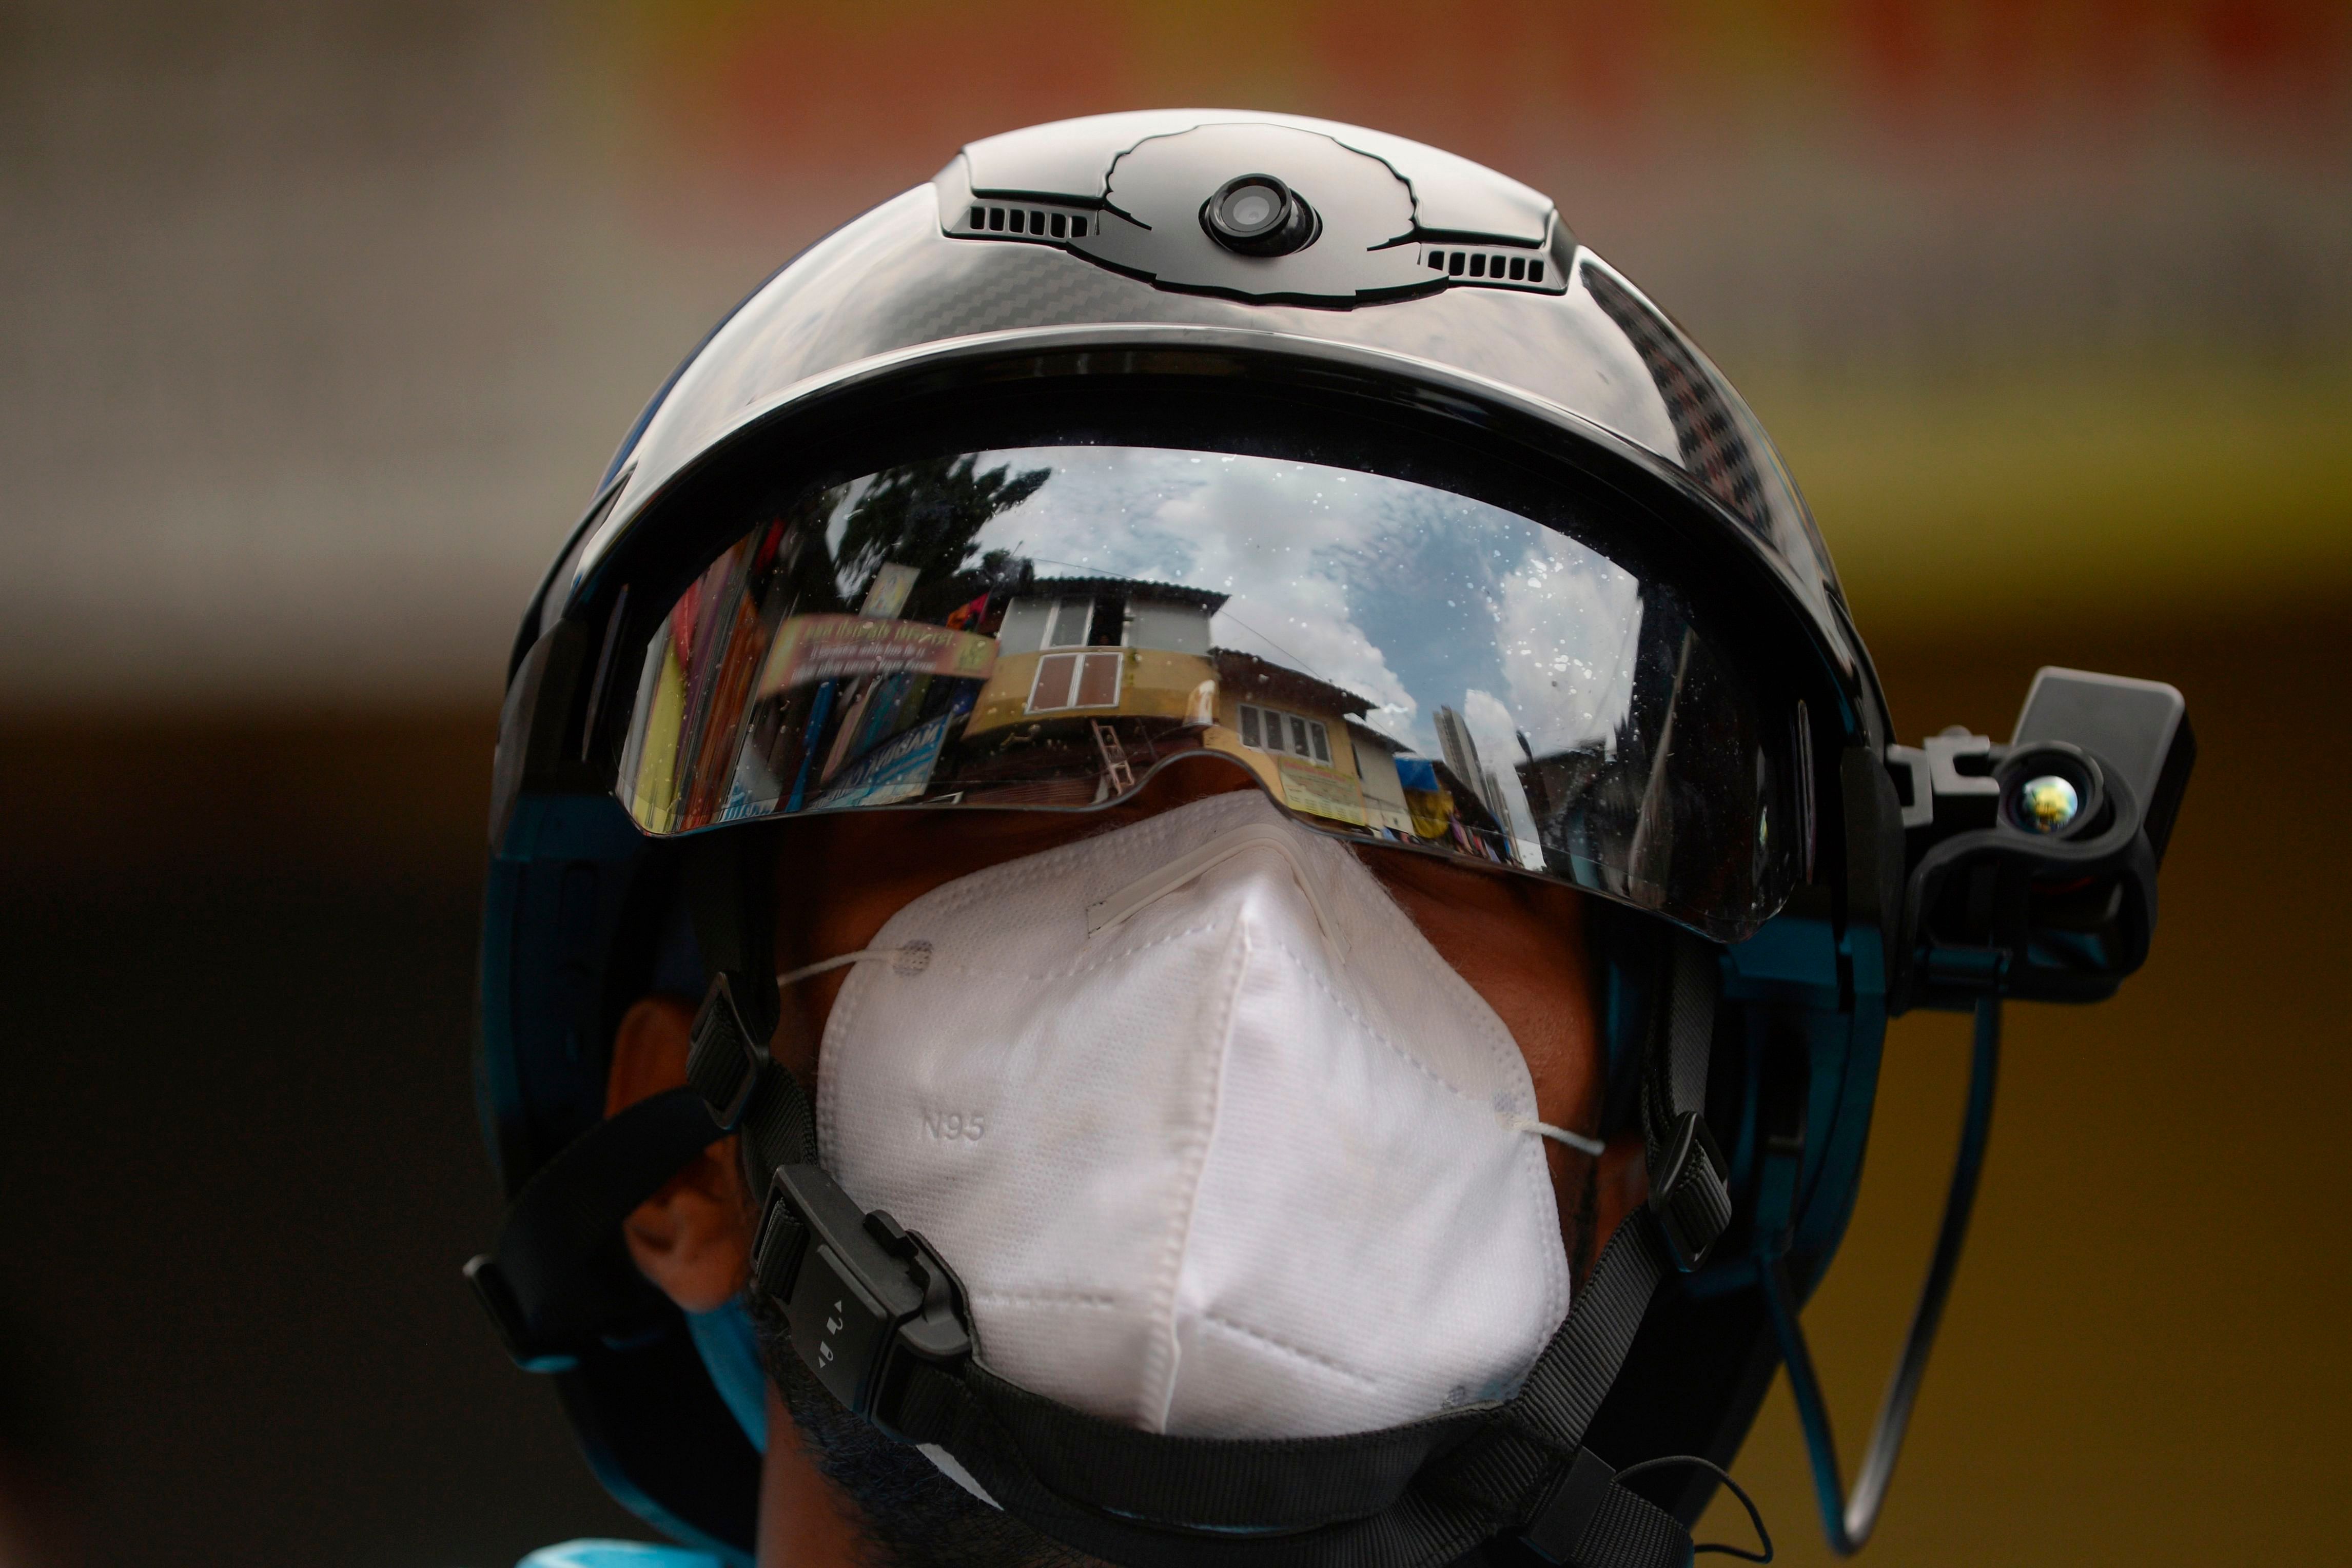 A volunteer health worker of the Non-Governmental Organization (NGO) Bharatiya Jain Sanghatana (BJS) wearing Personal Protective Equipment (PPE) looks through a smart helmet equipped with a thermo-scan sensor to check the body temperature during a door-to-door medical screening drive for the COVID-19 coronavirus, at a residential area in Mumbai. Credit: AFP